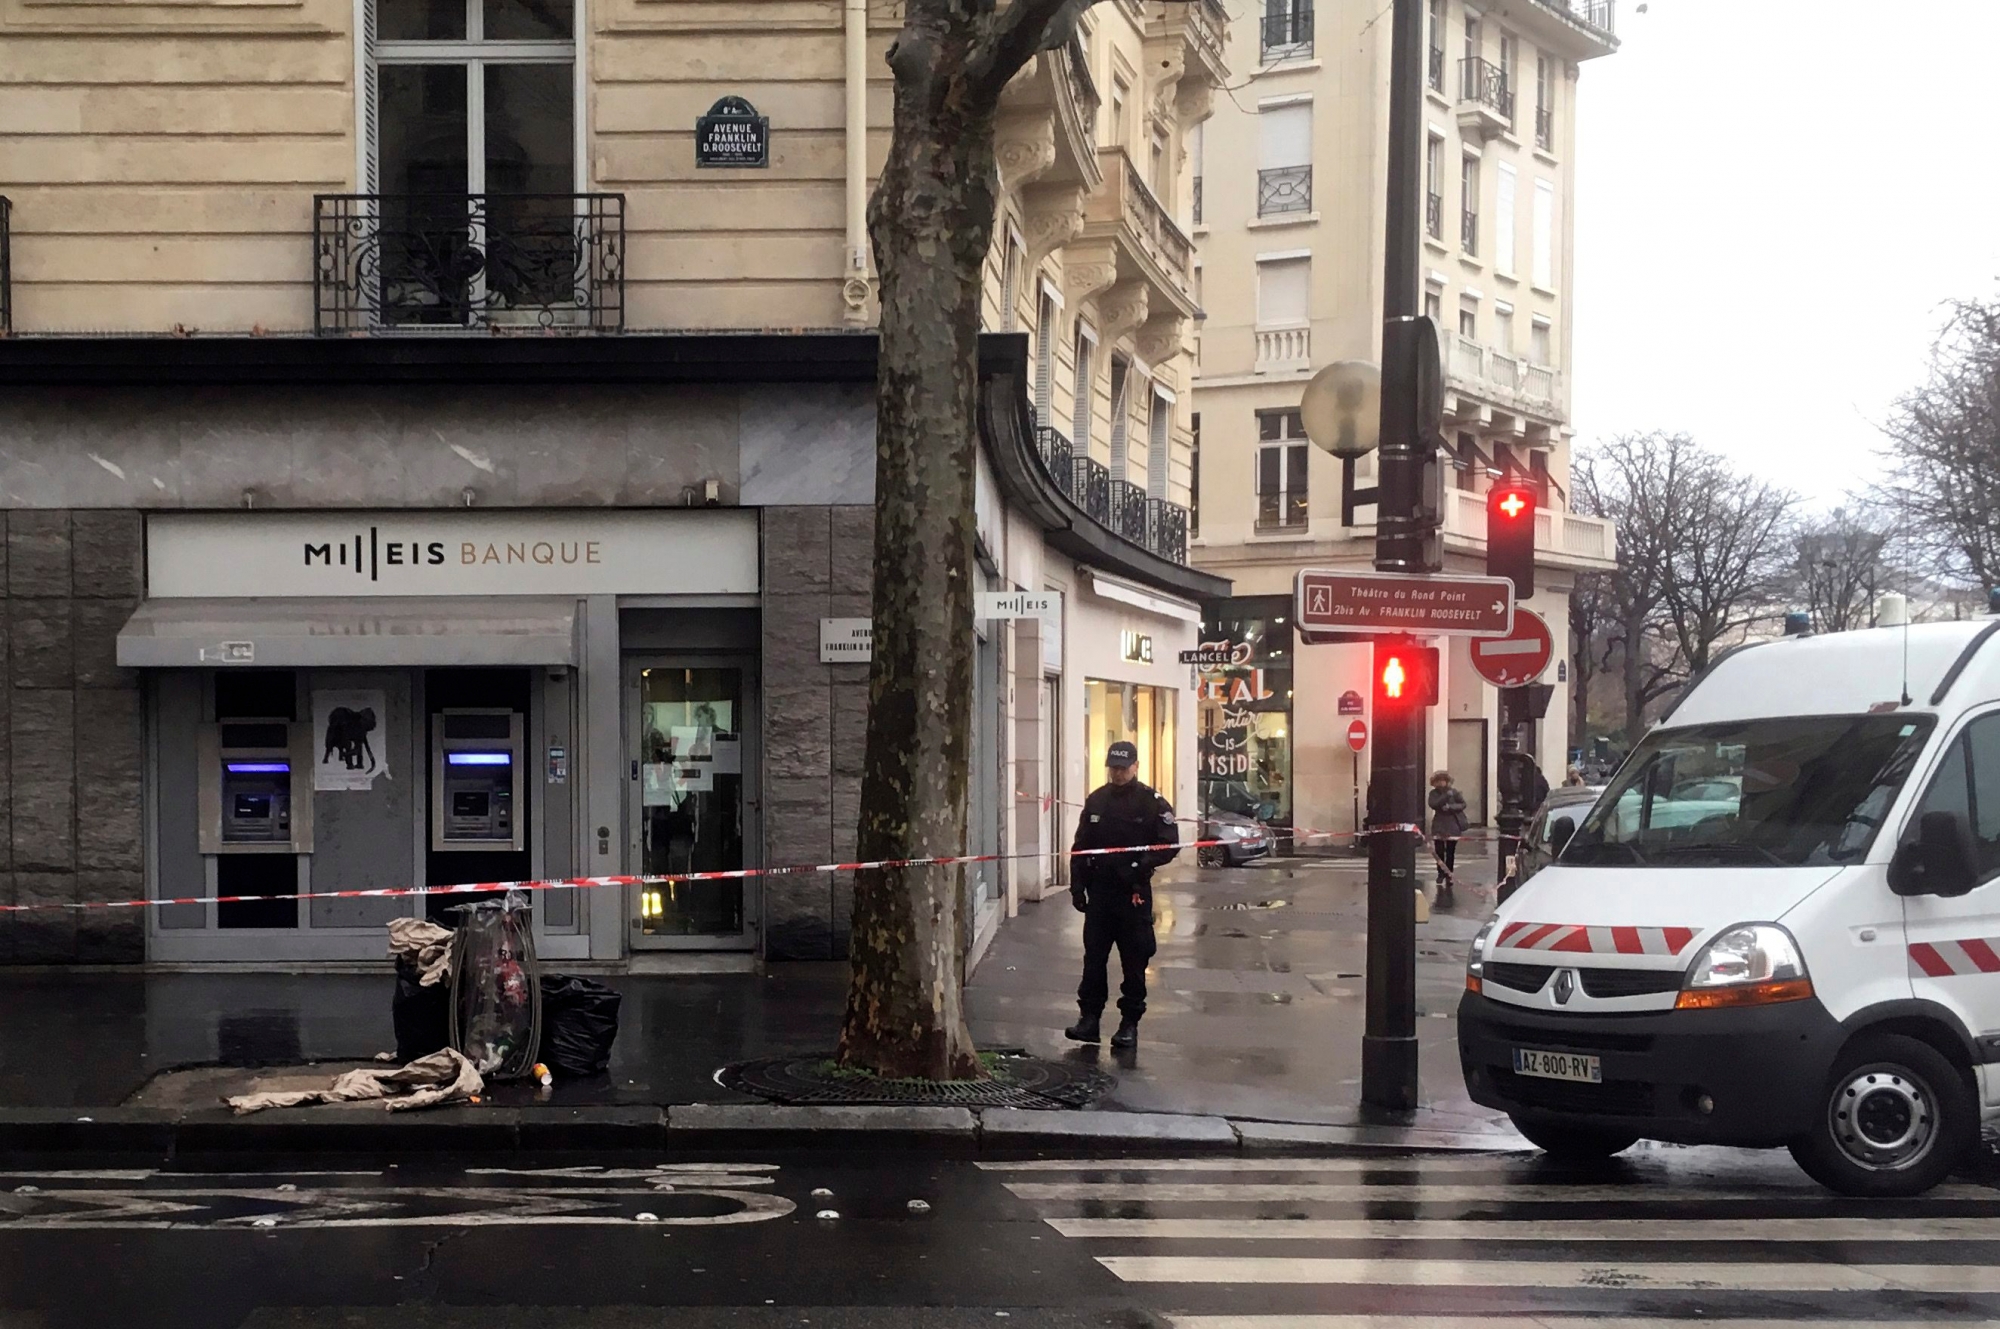 A police officer guards the Milleis bank after a robbery in Paris, Tuesday, Jan.22, 2019. Paris police say several suspects are on the run after they robbed the bank on the Champs-Elysees in broad daylight. (AP Photo/Bertrand Combaldieu) France Bank Robbery